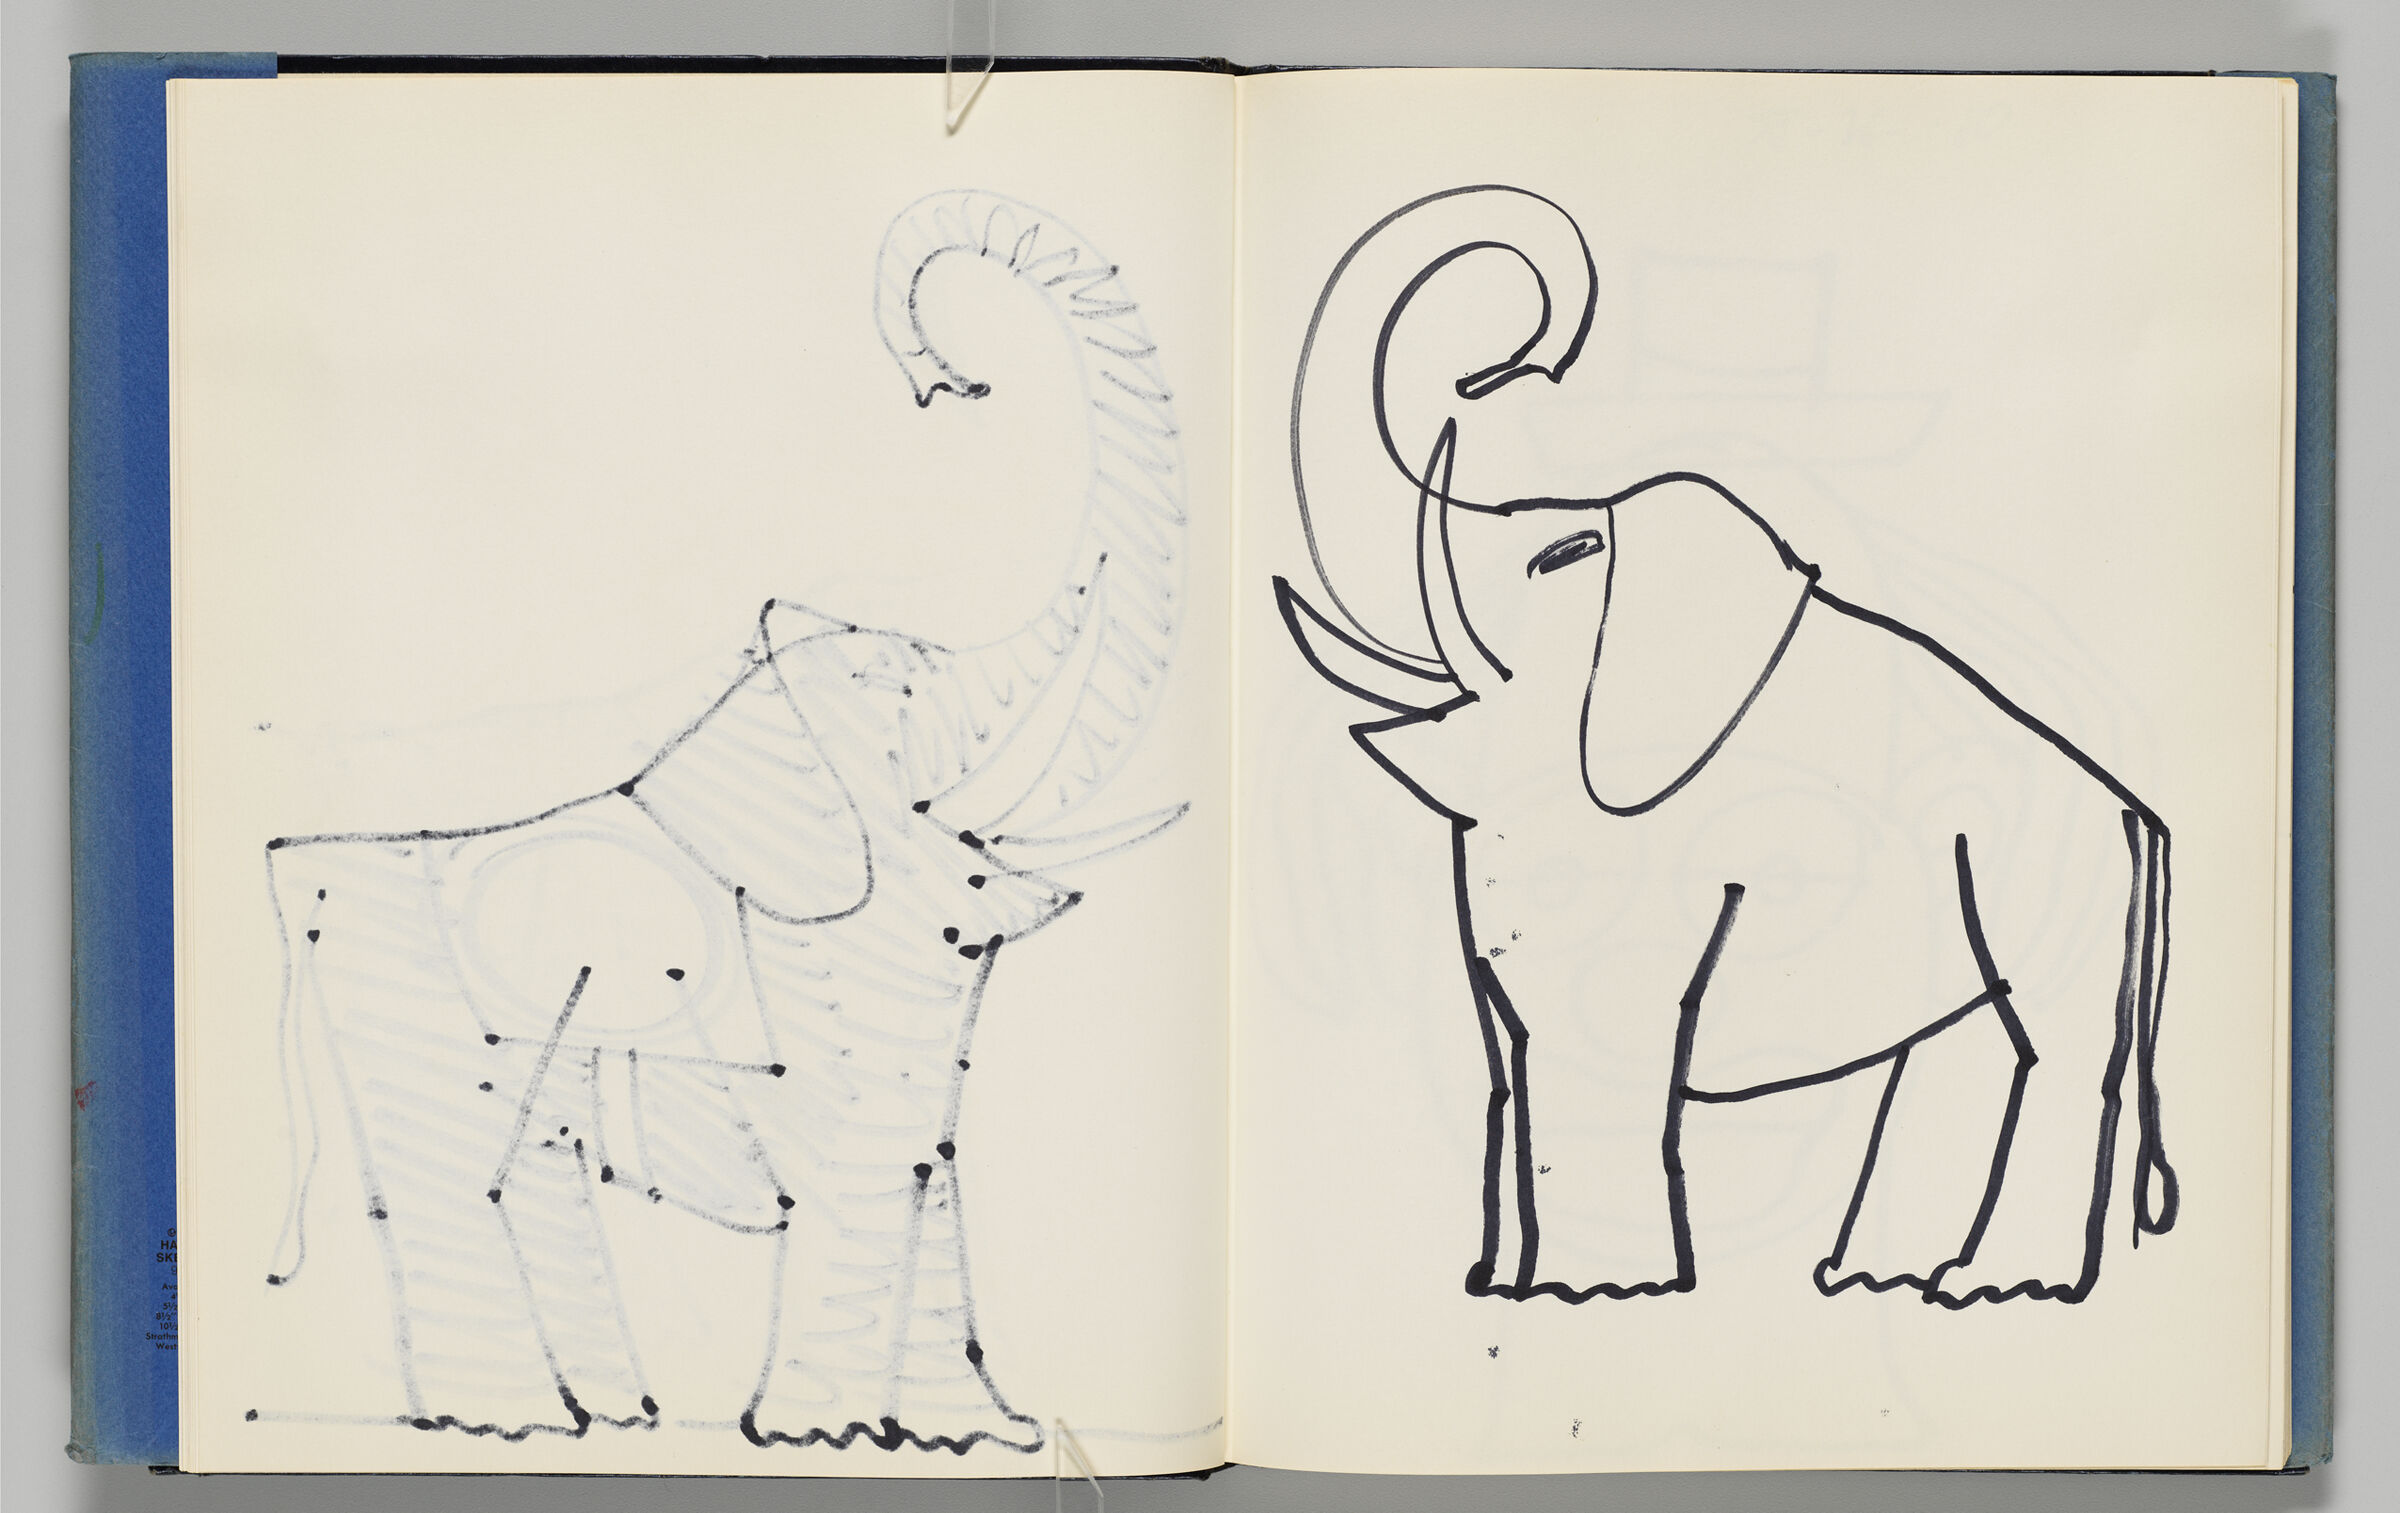 Untitled (Bleed-Through Of Previous Page, Left Page); Untitled (Elephant, Right Page)